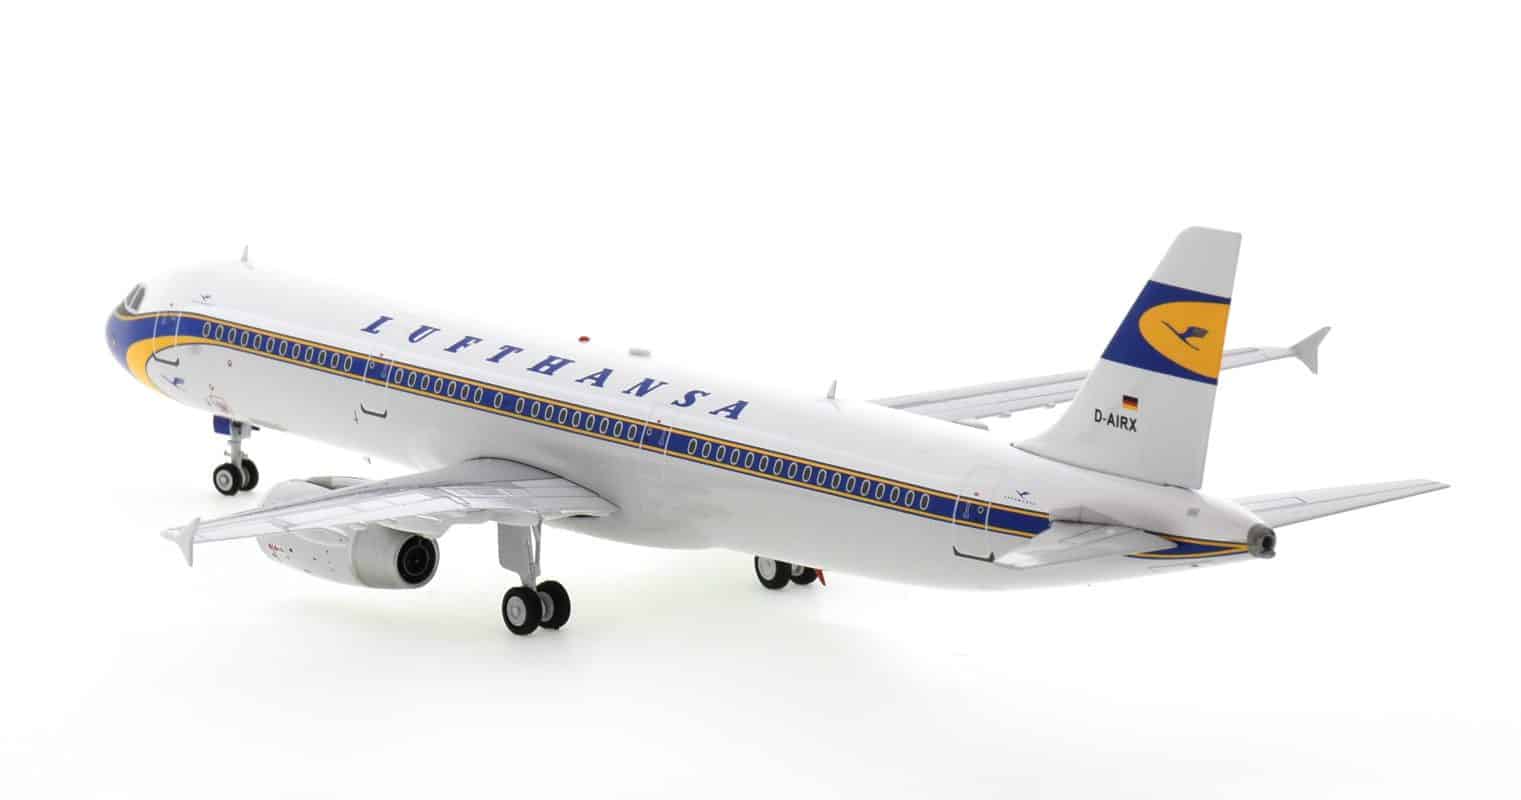 Rear view of JFox JF-A321-027 - 1/200 scale diecast model Airbus A321-100, registration D-AIRX in Lufthansa's retro livery